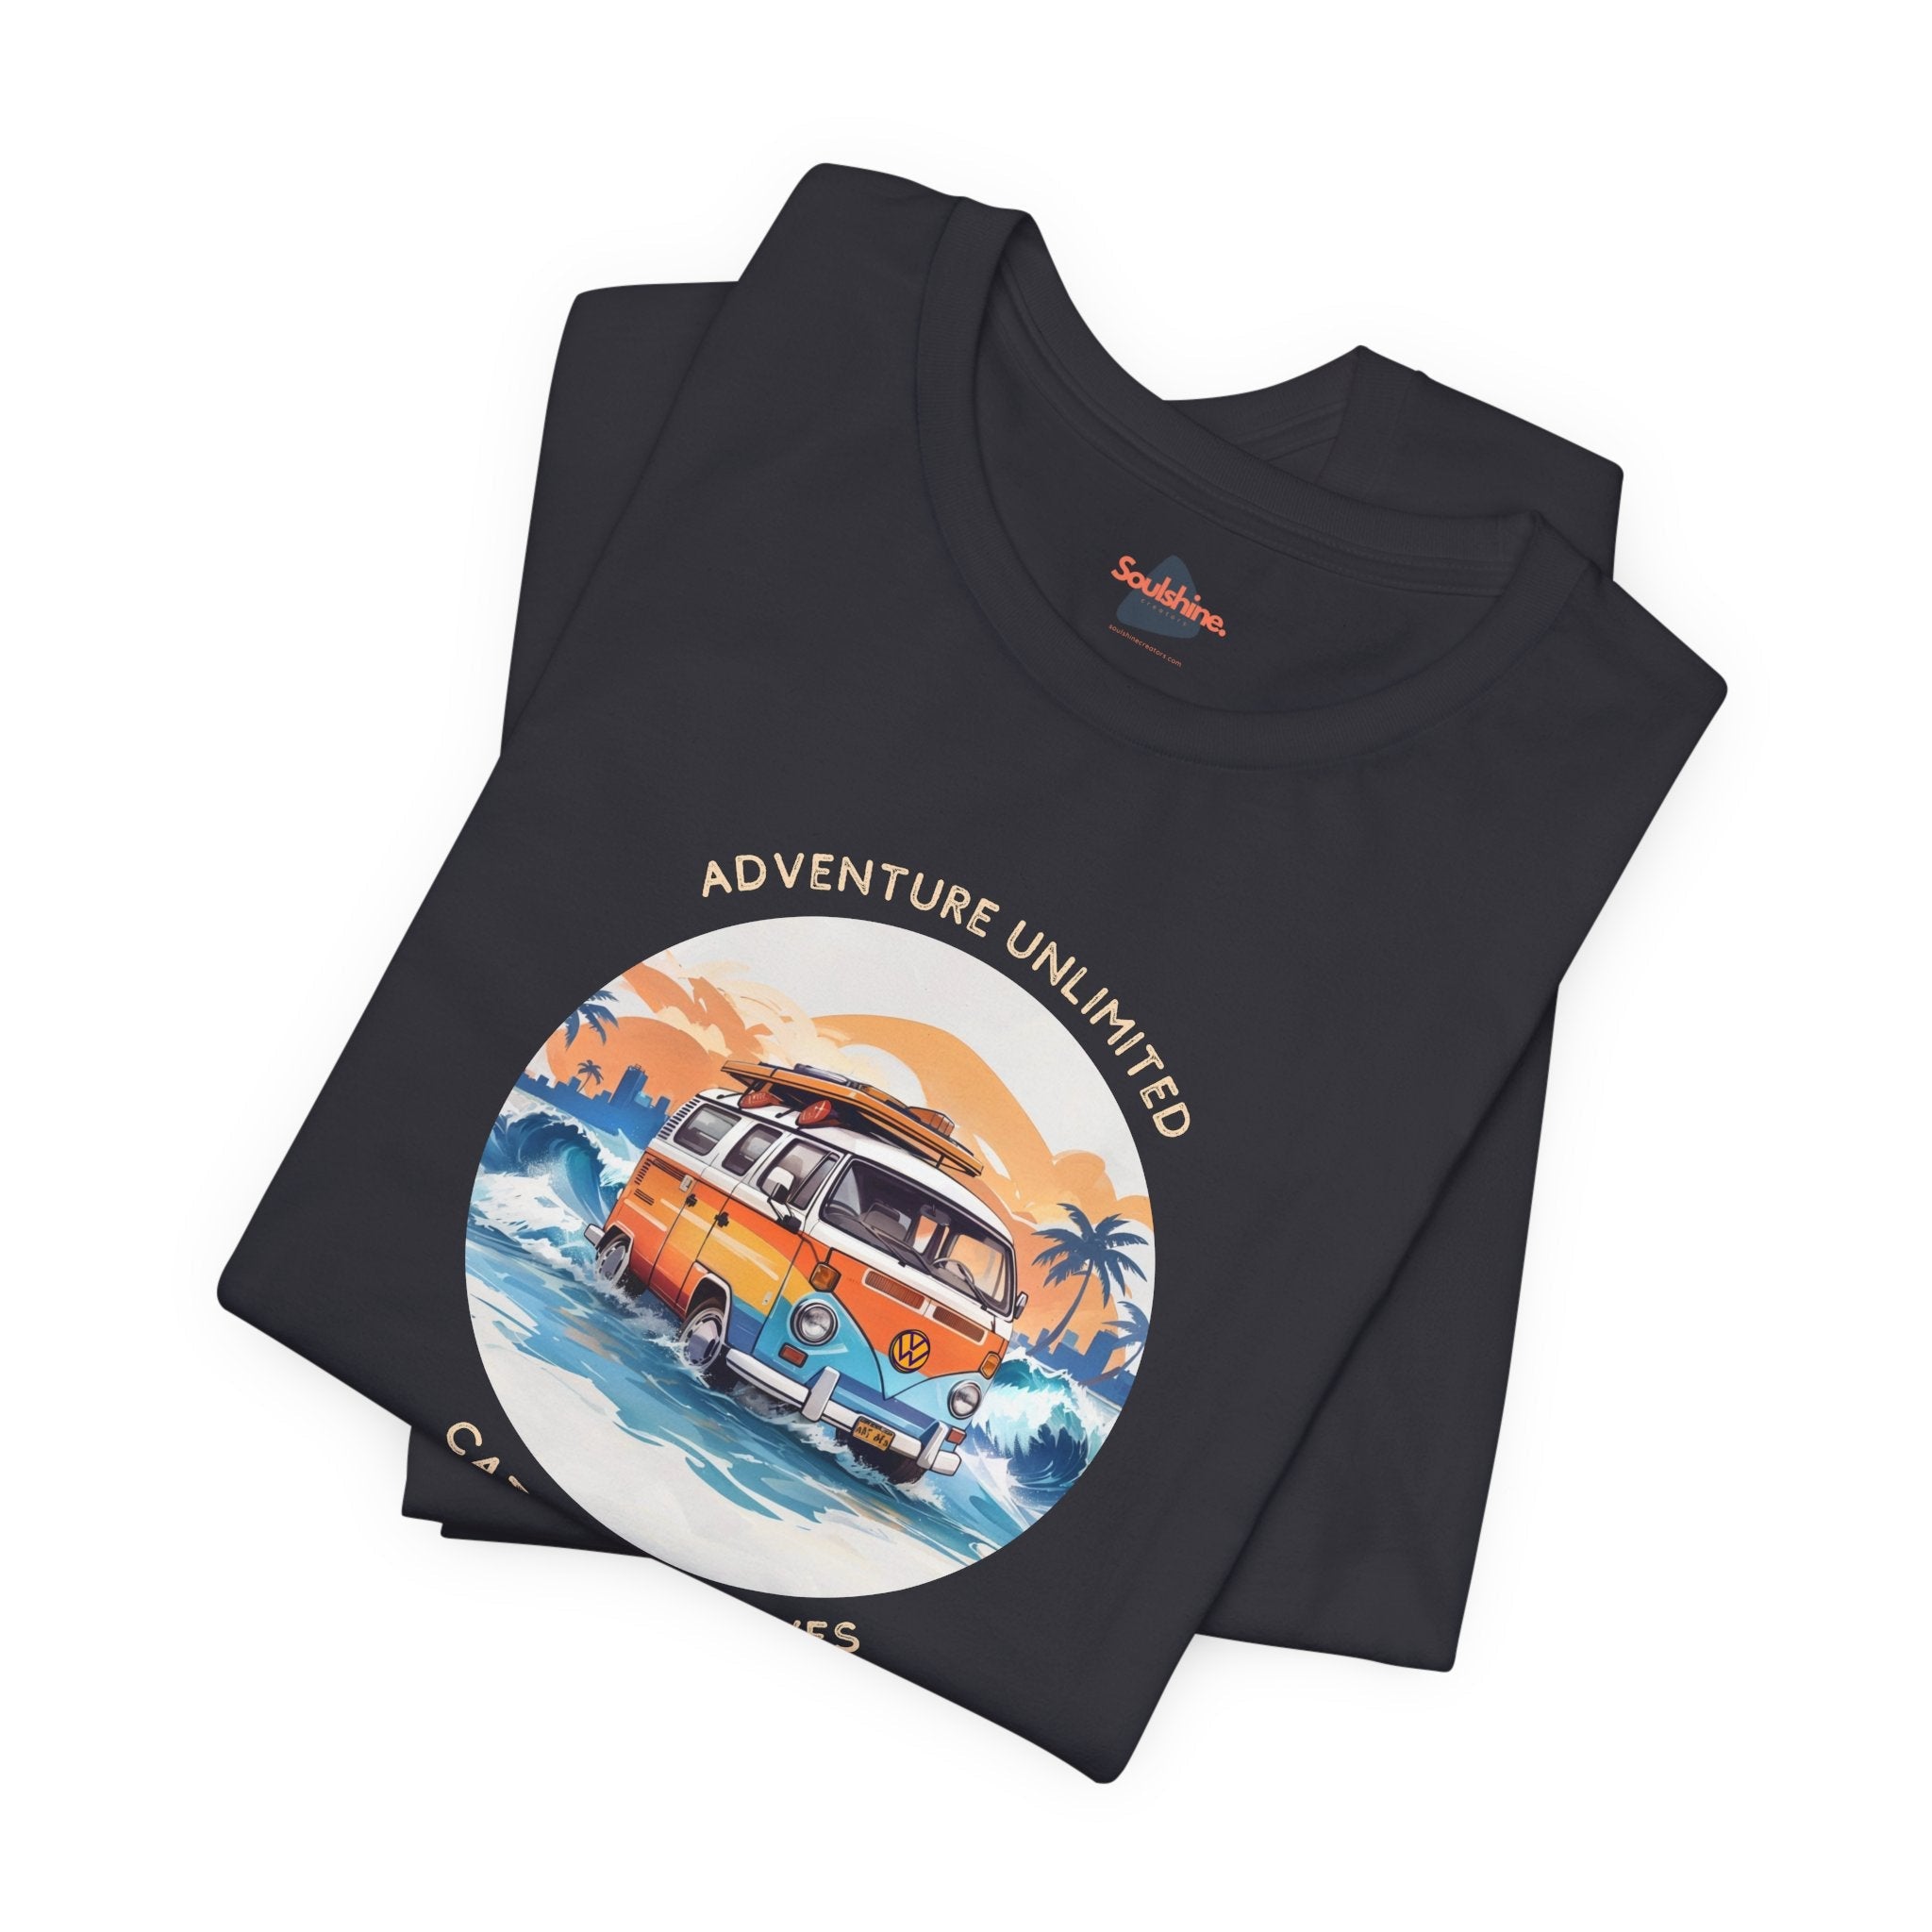 Adventure Unlimited Unisex Jersey Tee with Van and Surfboard Design printed - Direct-to-Garment Item